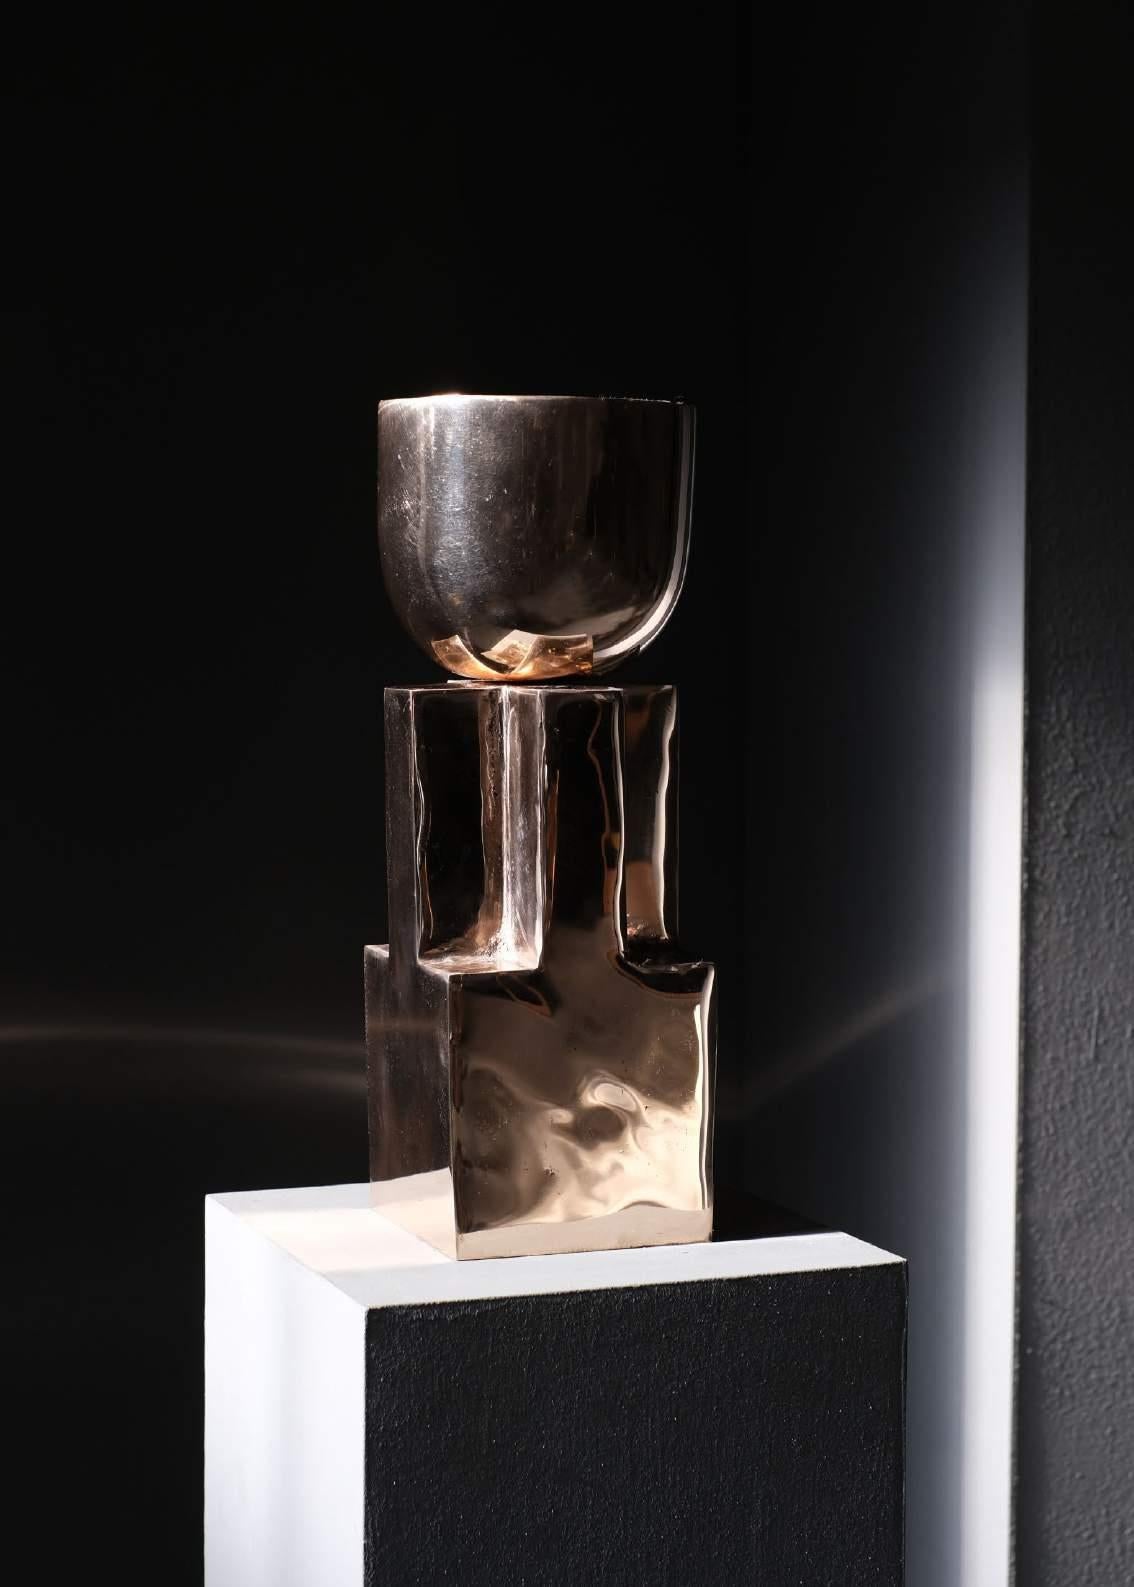 Bronze Goblet bowl - Signed Arno Declercq
Measures: 14 cm L x 14 cm W x 40 cm H
5.5” L x 5.5” W x 15.7” H
Material: Bronze
Signed by Arno Declercq

Arno Declercq
Belgian designer and art dealer who makes bespoke objects with passion for